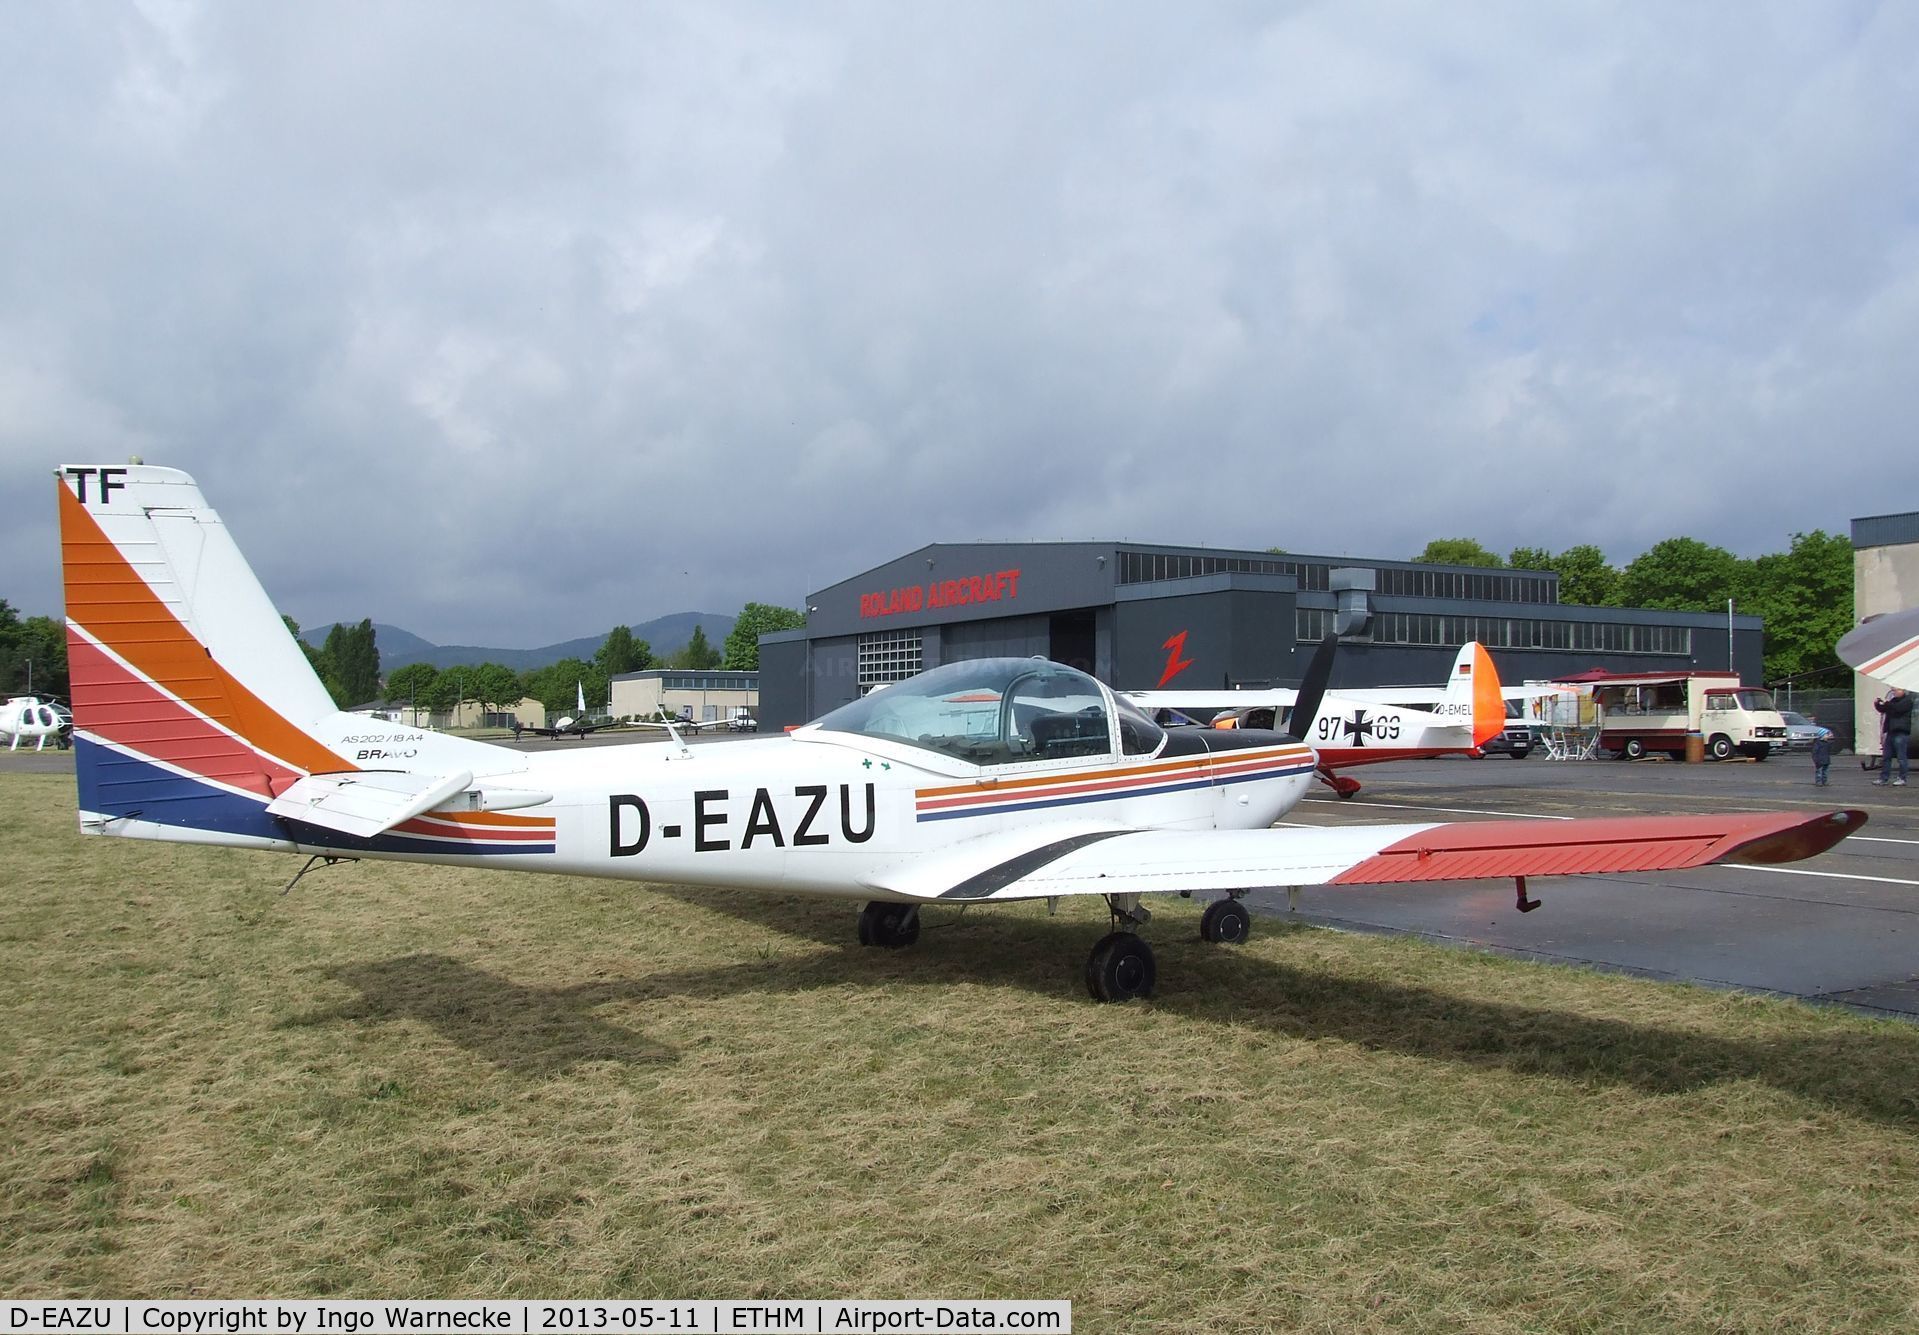 D-EAZU, 1987 FFA AS-202/18A-4 Bravo C/N 225, FFA AS.202/18 A4 Bravo during an open day at the Fliegendes Museum Mendig (Flying Museum) at former German Army Aviation base, now civilian Mendig airfield